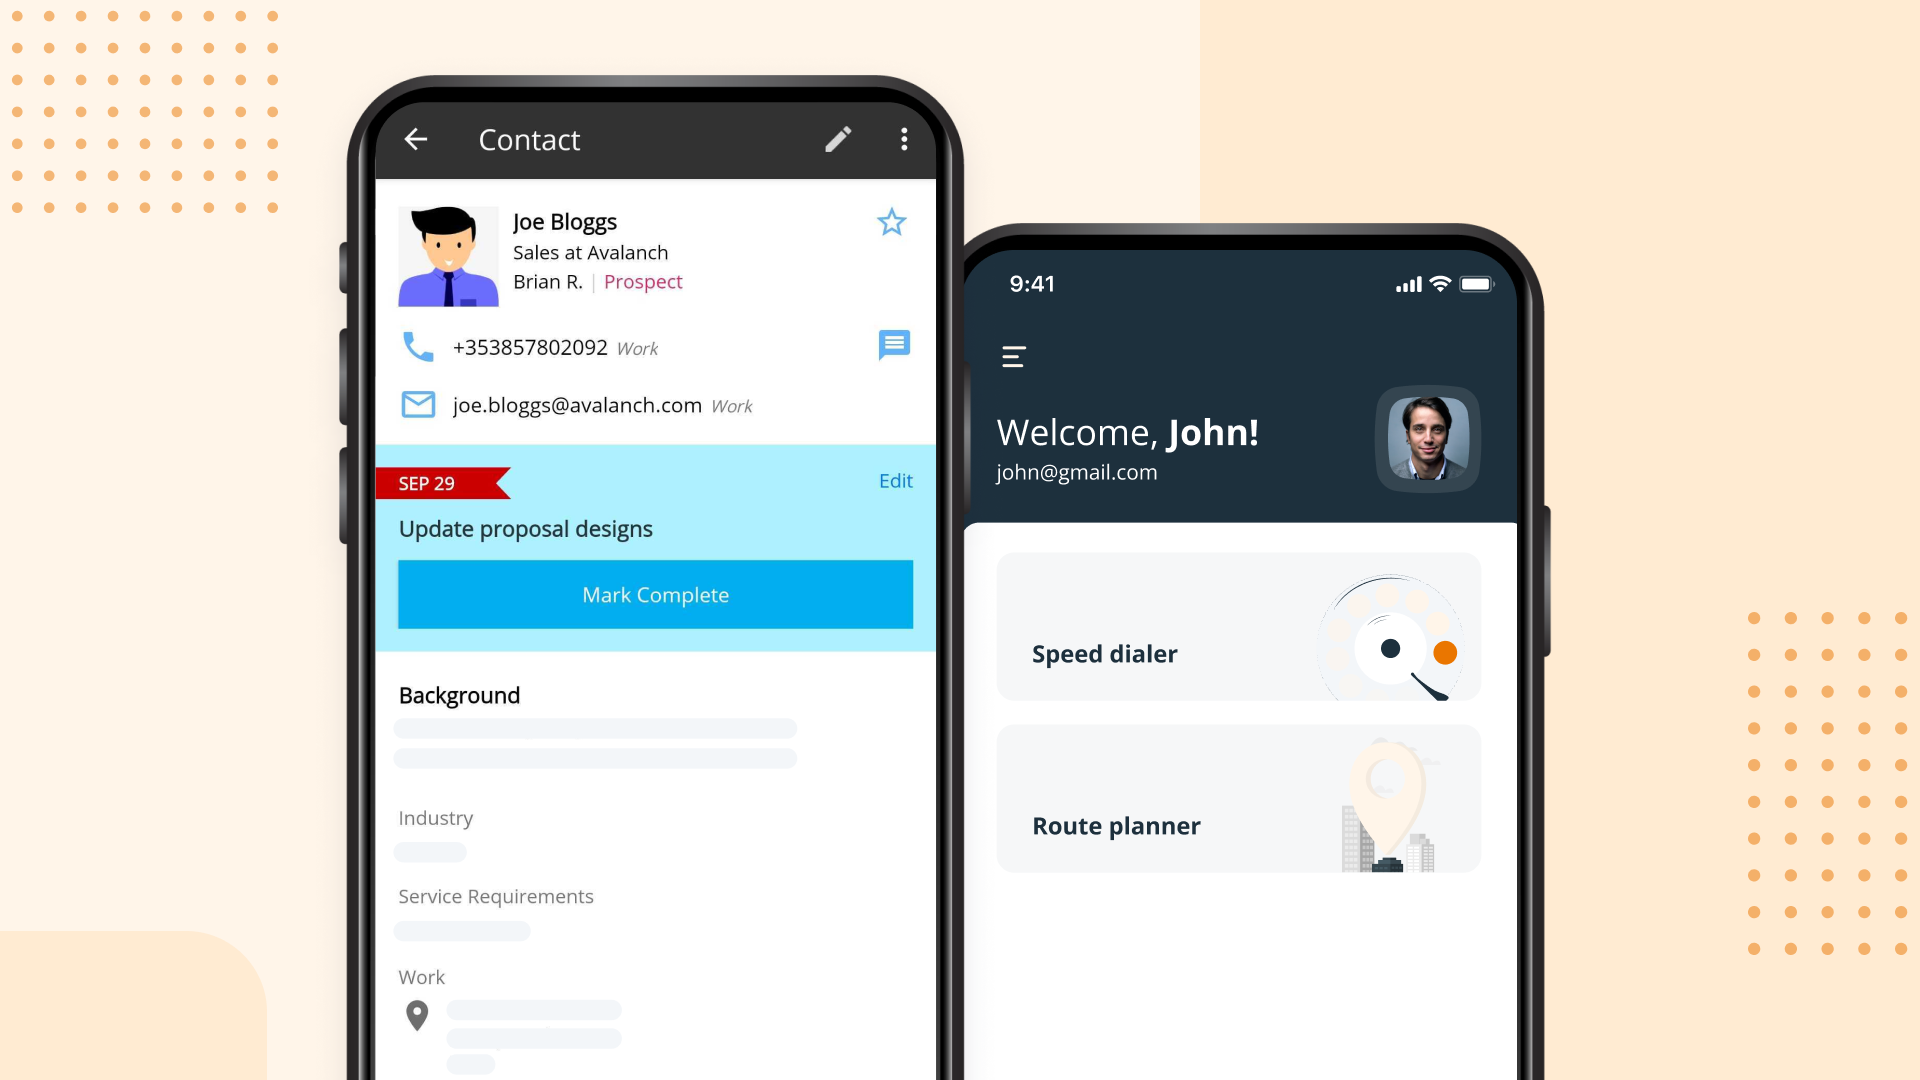 OnePageCRM Software - Harness the power of the action-focused mobile CRM with native iOS and Android apps. Capture leads, follow up with prospects, navigate to your next sales meeting, and collaborate with your team on the go!